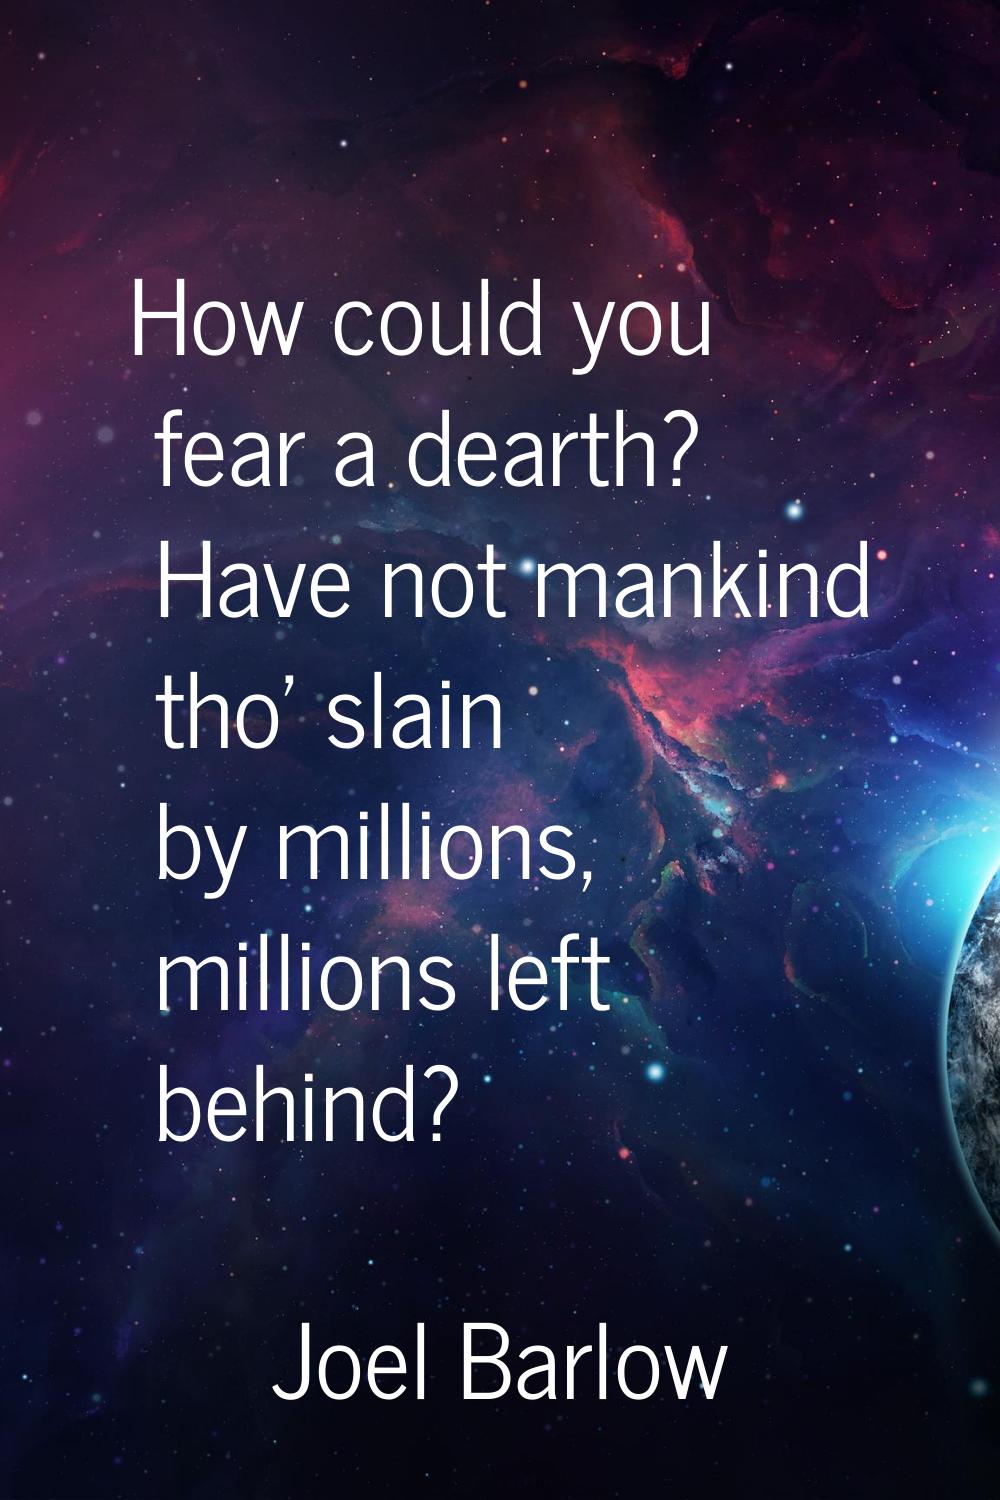 How could you fear a dearth? Have not mankind tho' slain by millions, millions left behind?